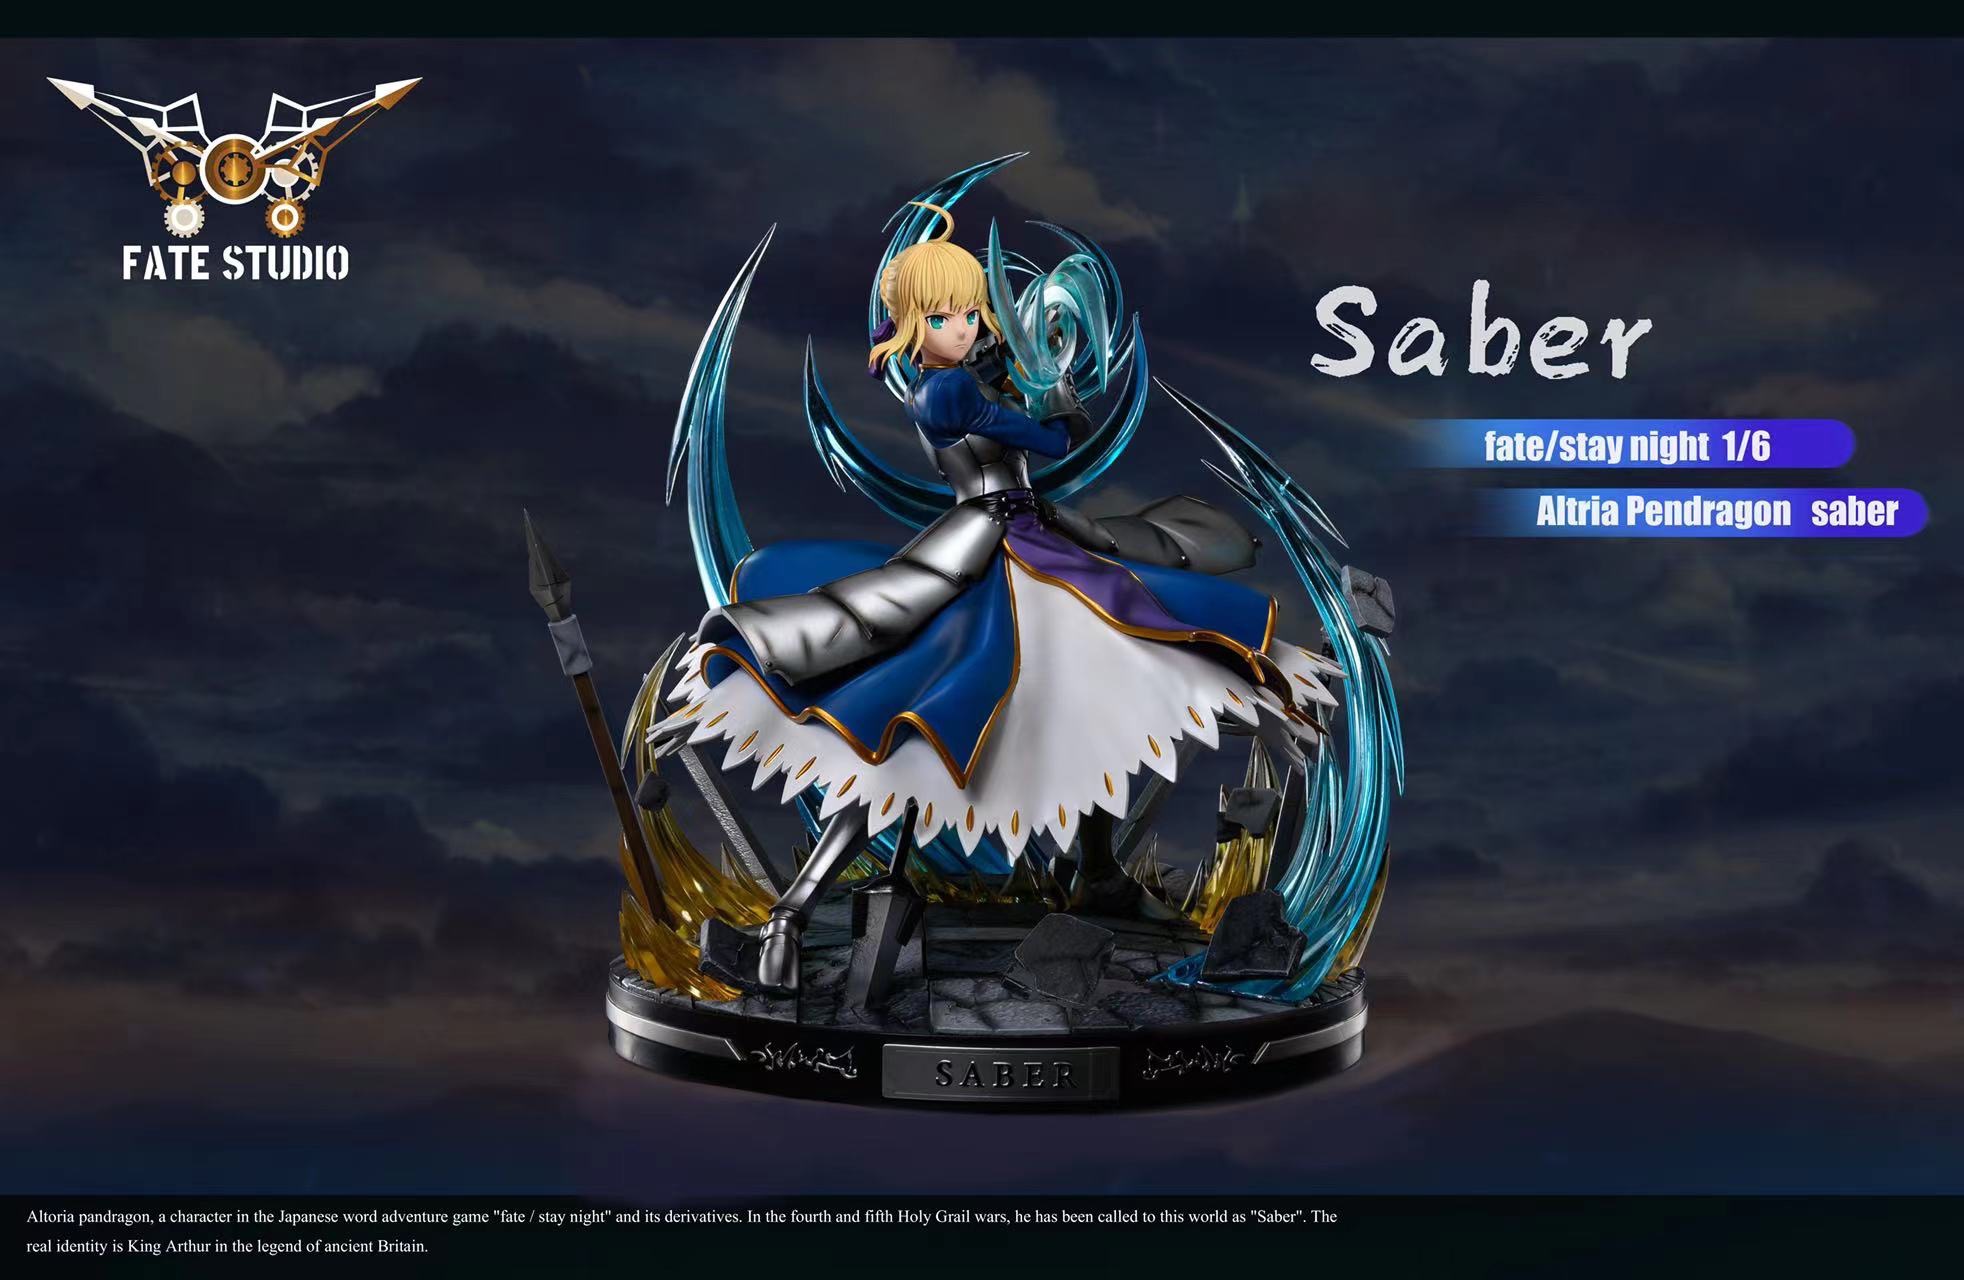 Saber เซเบอร์ by Fate Studio (มัดจำ) [[SOLD OUT]]